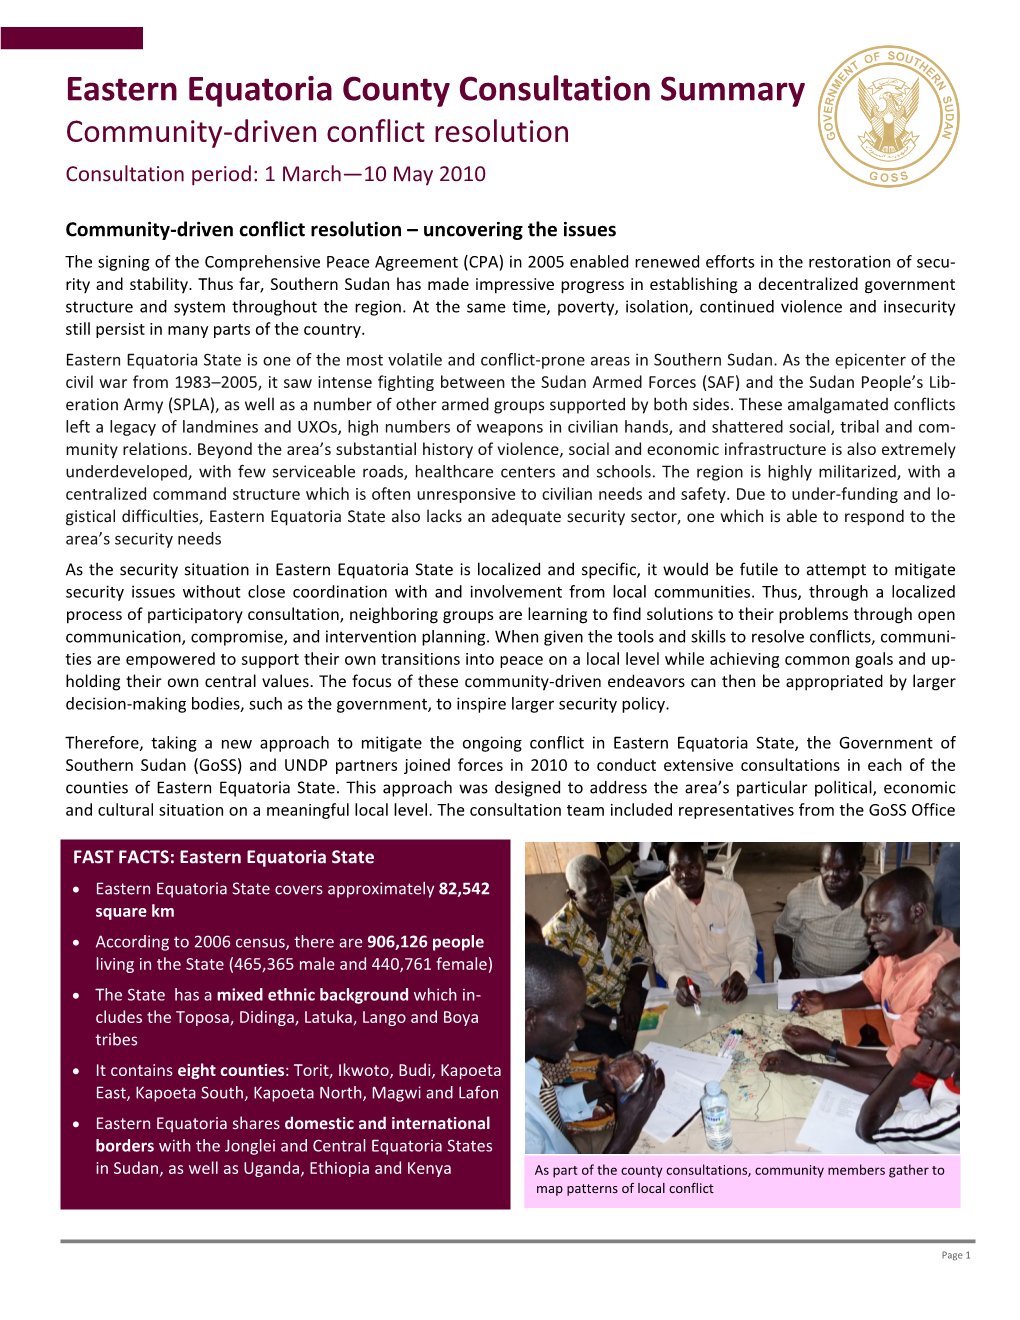 Eastern Equatoria County Consultation Summary Community‐Driven Conflict Resolution